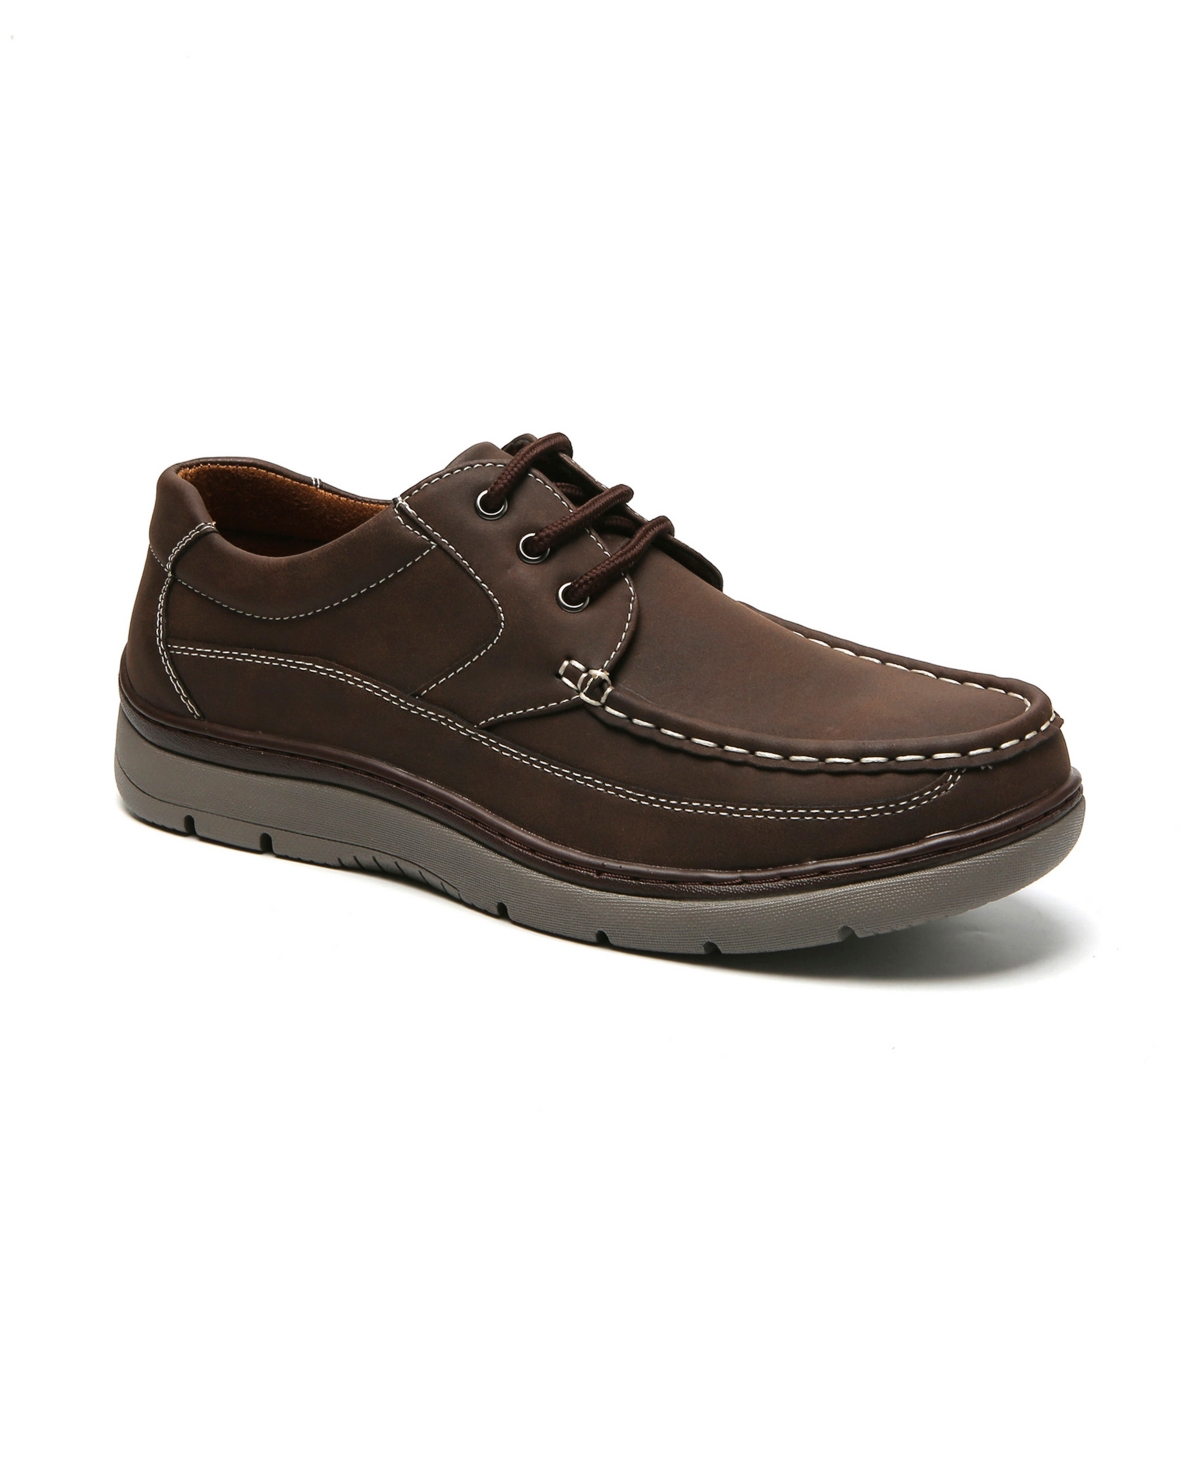 Men's Lace-Up Comfort Casual Shoes - Brown